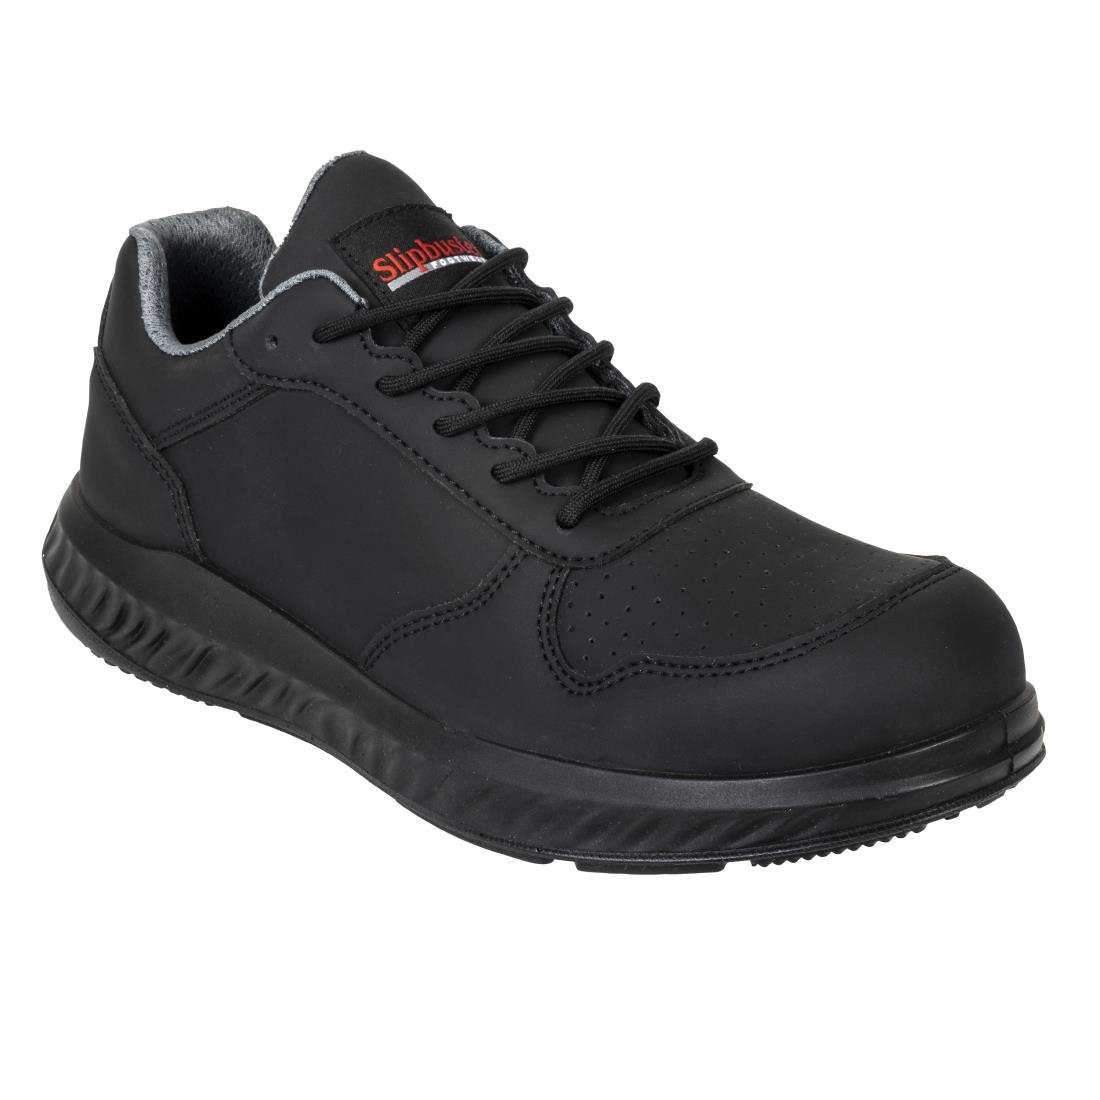 BA063-43 Slipbuster Recycled Microfibre Trainers Matte Black 43 JD Catering Equipment Solutions Ltd